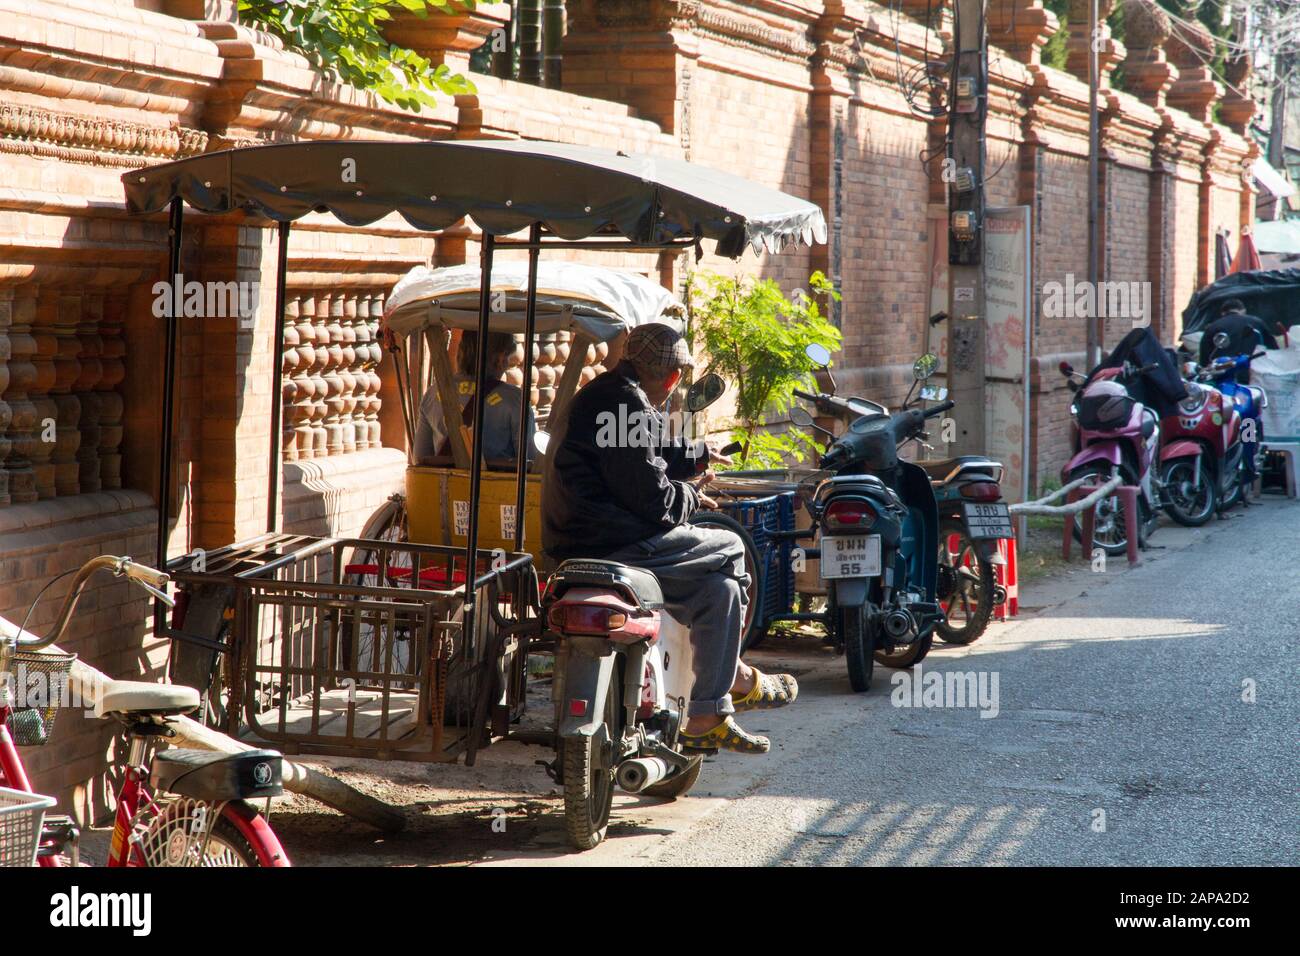 Chiang Mai  Worker waiting on bike in street  transport vehicles, Chiang Mai Thailand Stock Photo